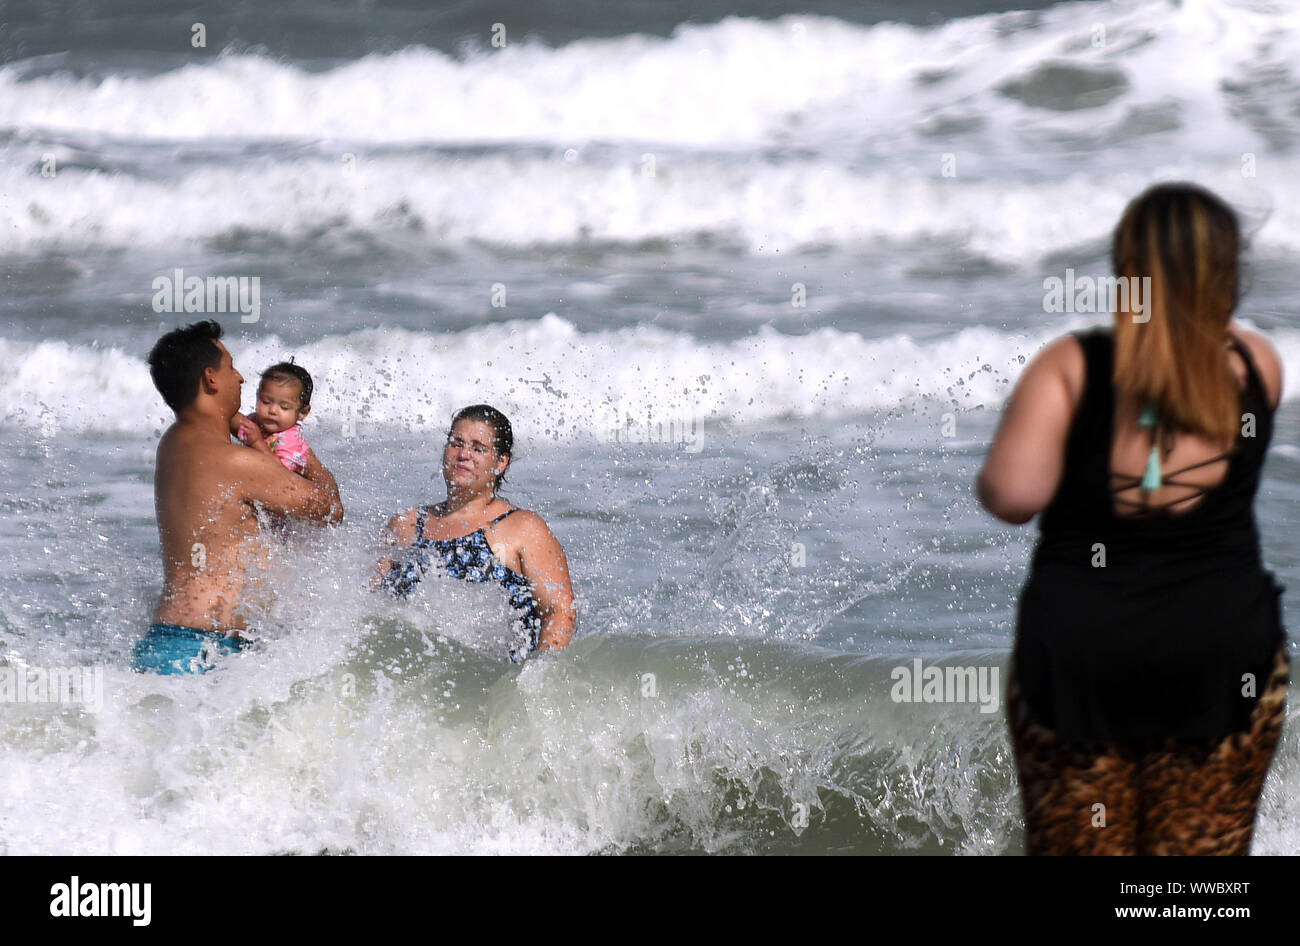 Florida, USA. 14th Sep, 2019. Beach-goers enjoy the rough surf generated by the Tropical Storm Humberto as it moves north off the coast of Florida. Credit: SOPA Images Limited/Alamy Live News Stock Photo